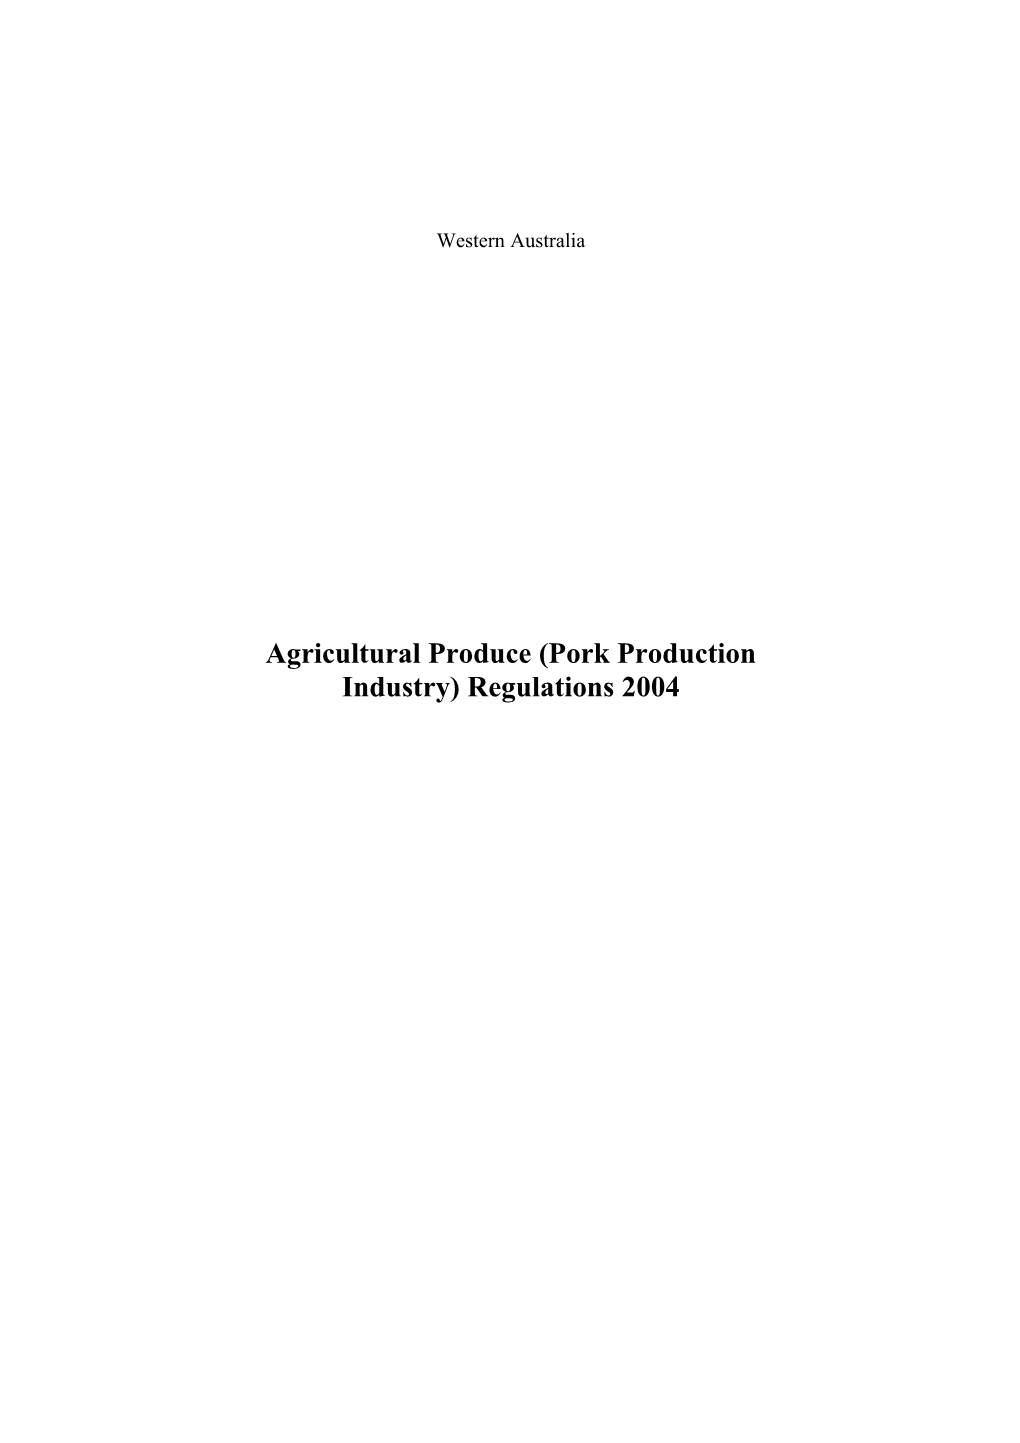 Agricultural Produce (Pork Production Industry) Regulations 2004 - 00-B0-07